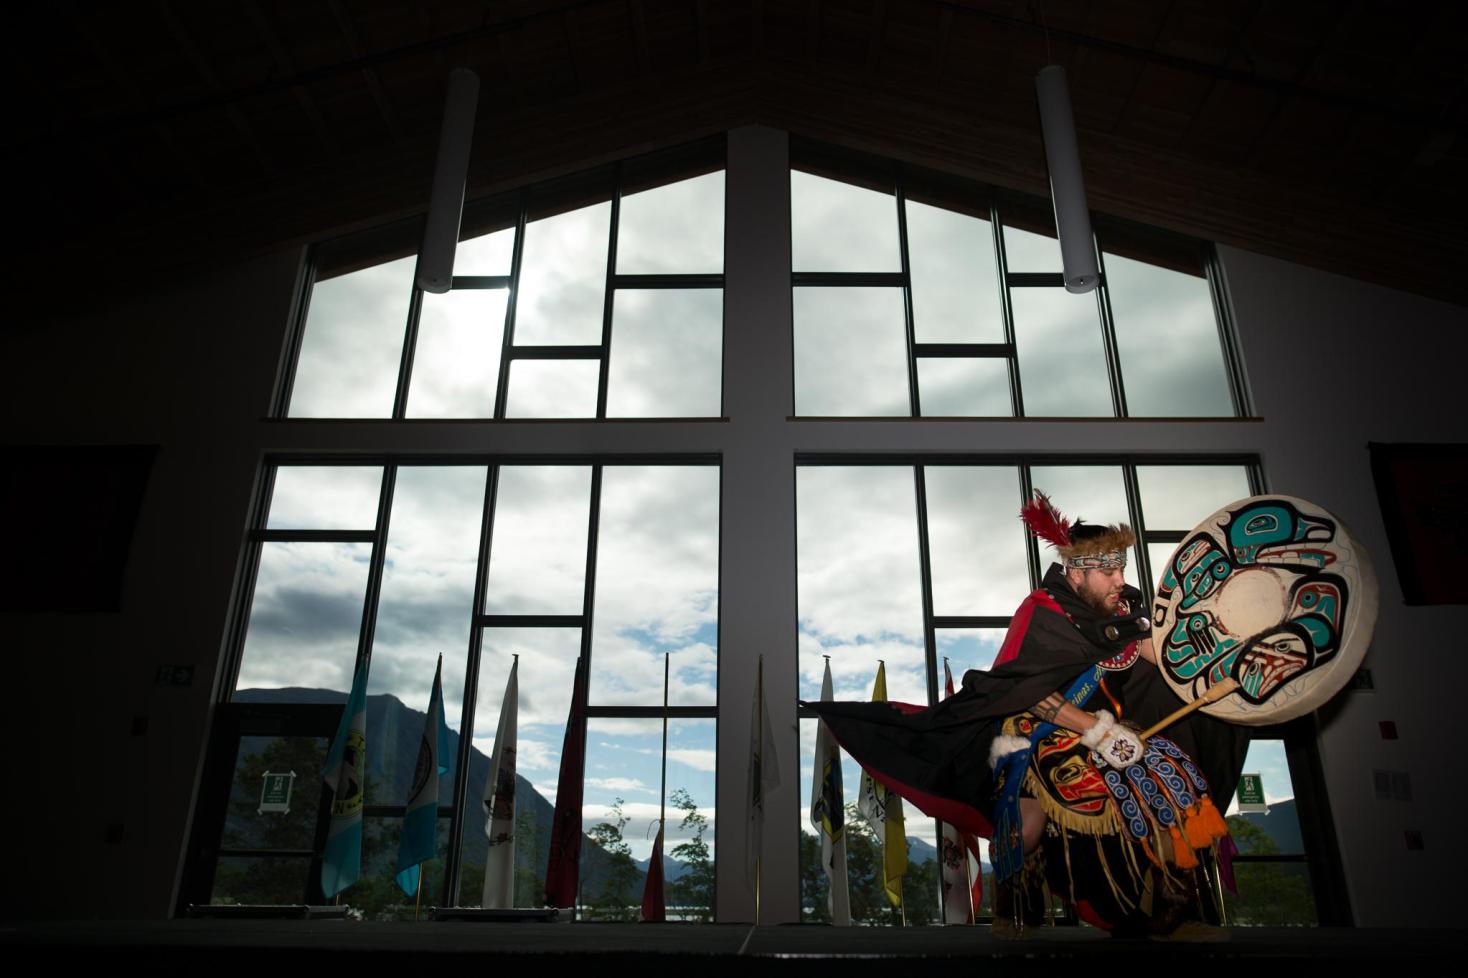 The Carcross/Tagish First Nation infuses its values into everything it takes part in.